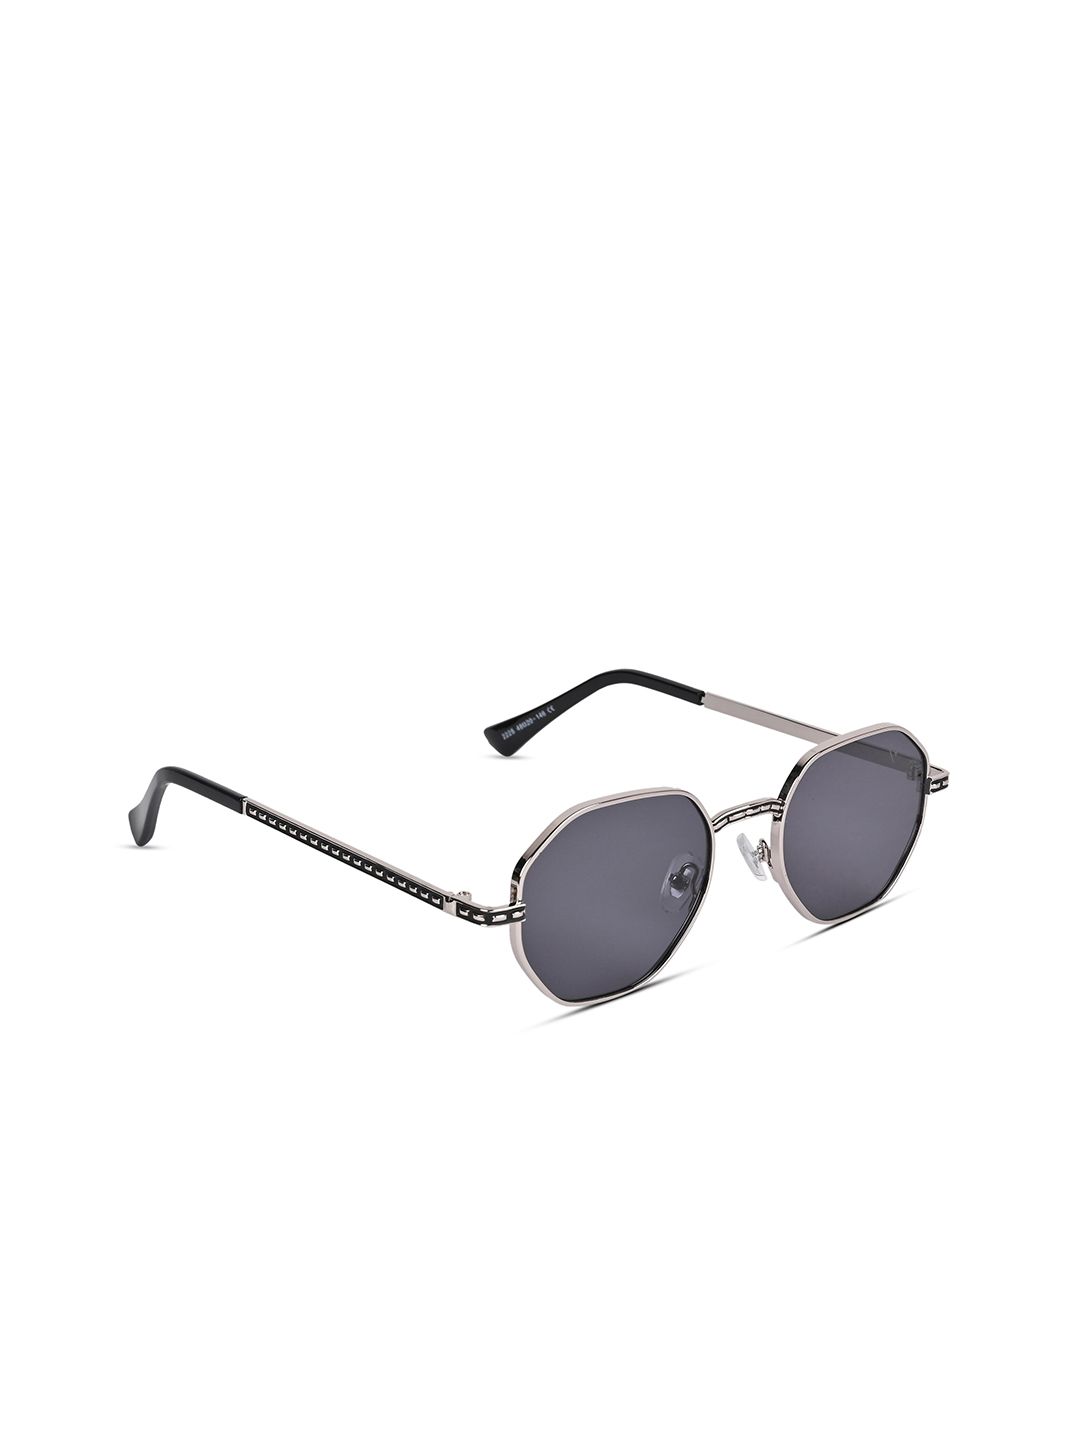 Voyage Unisex Black Lens & Silver-Toned Round UV Protected Lens Sunglasses Price in India